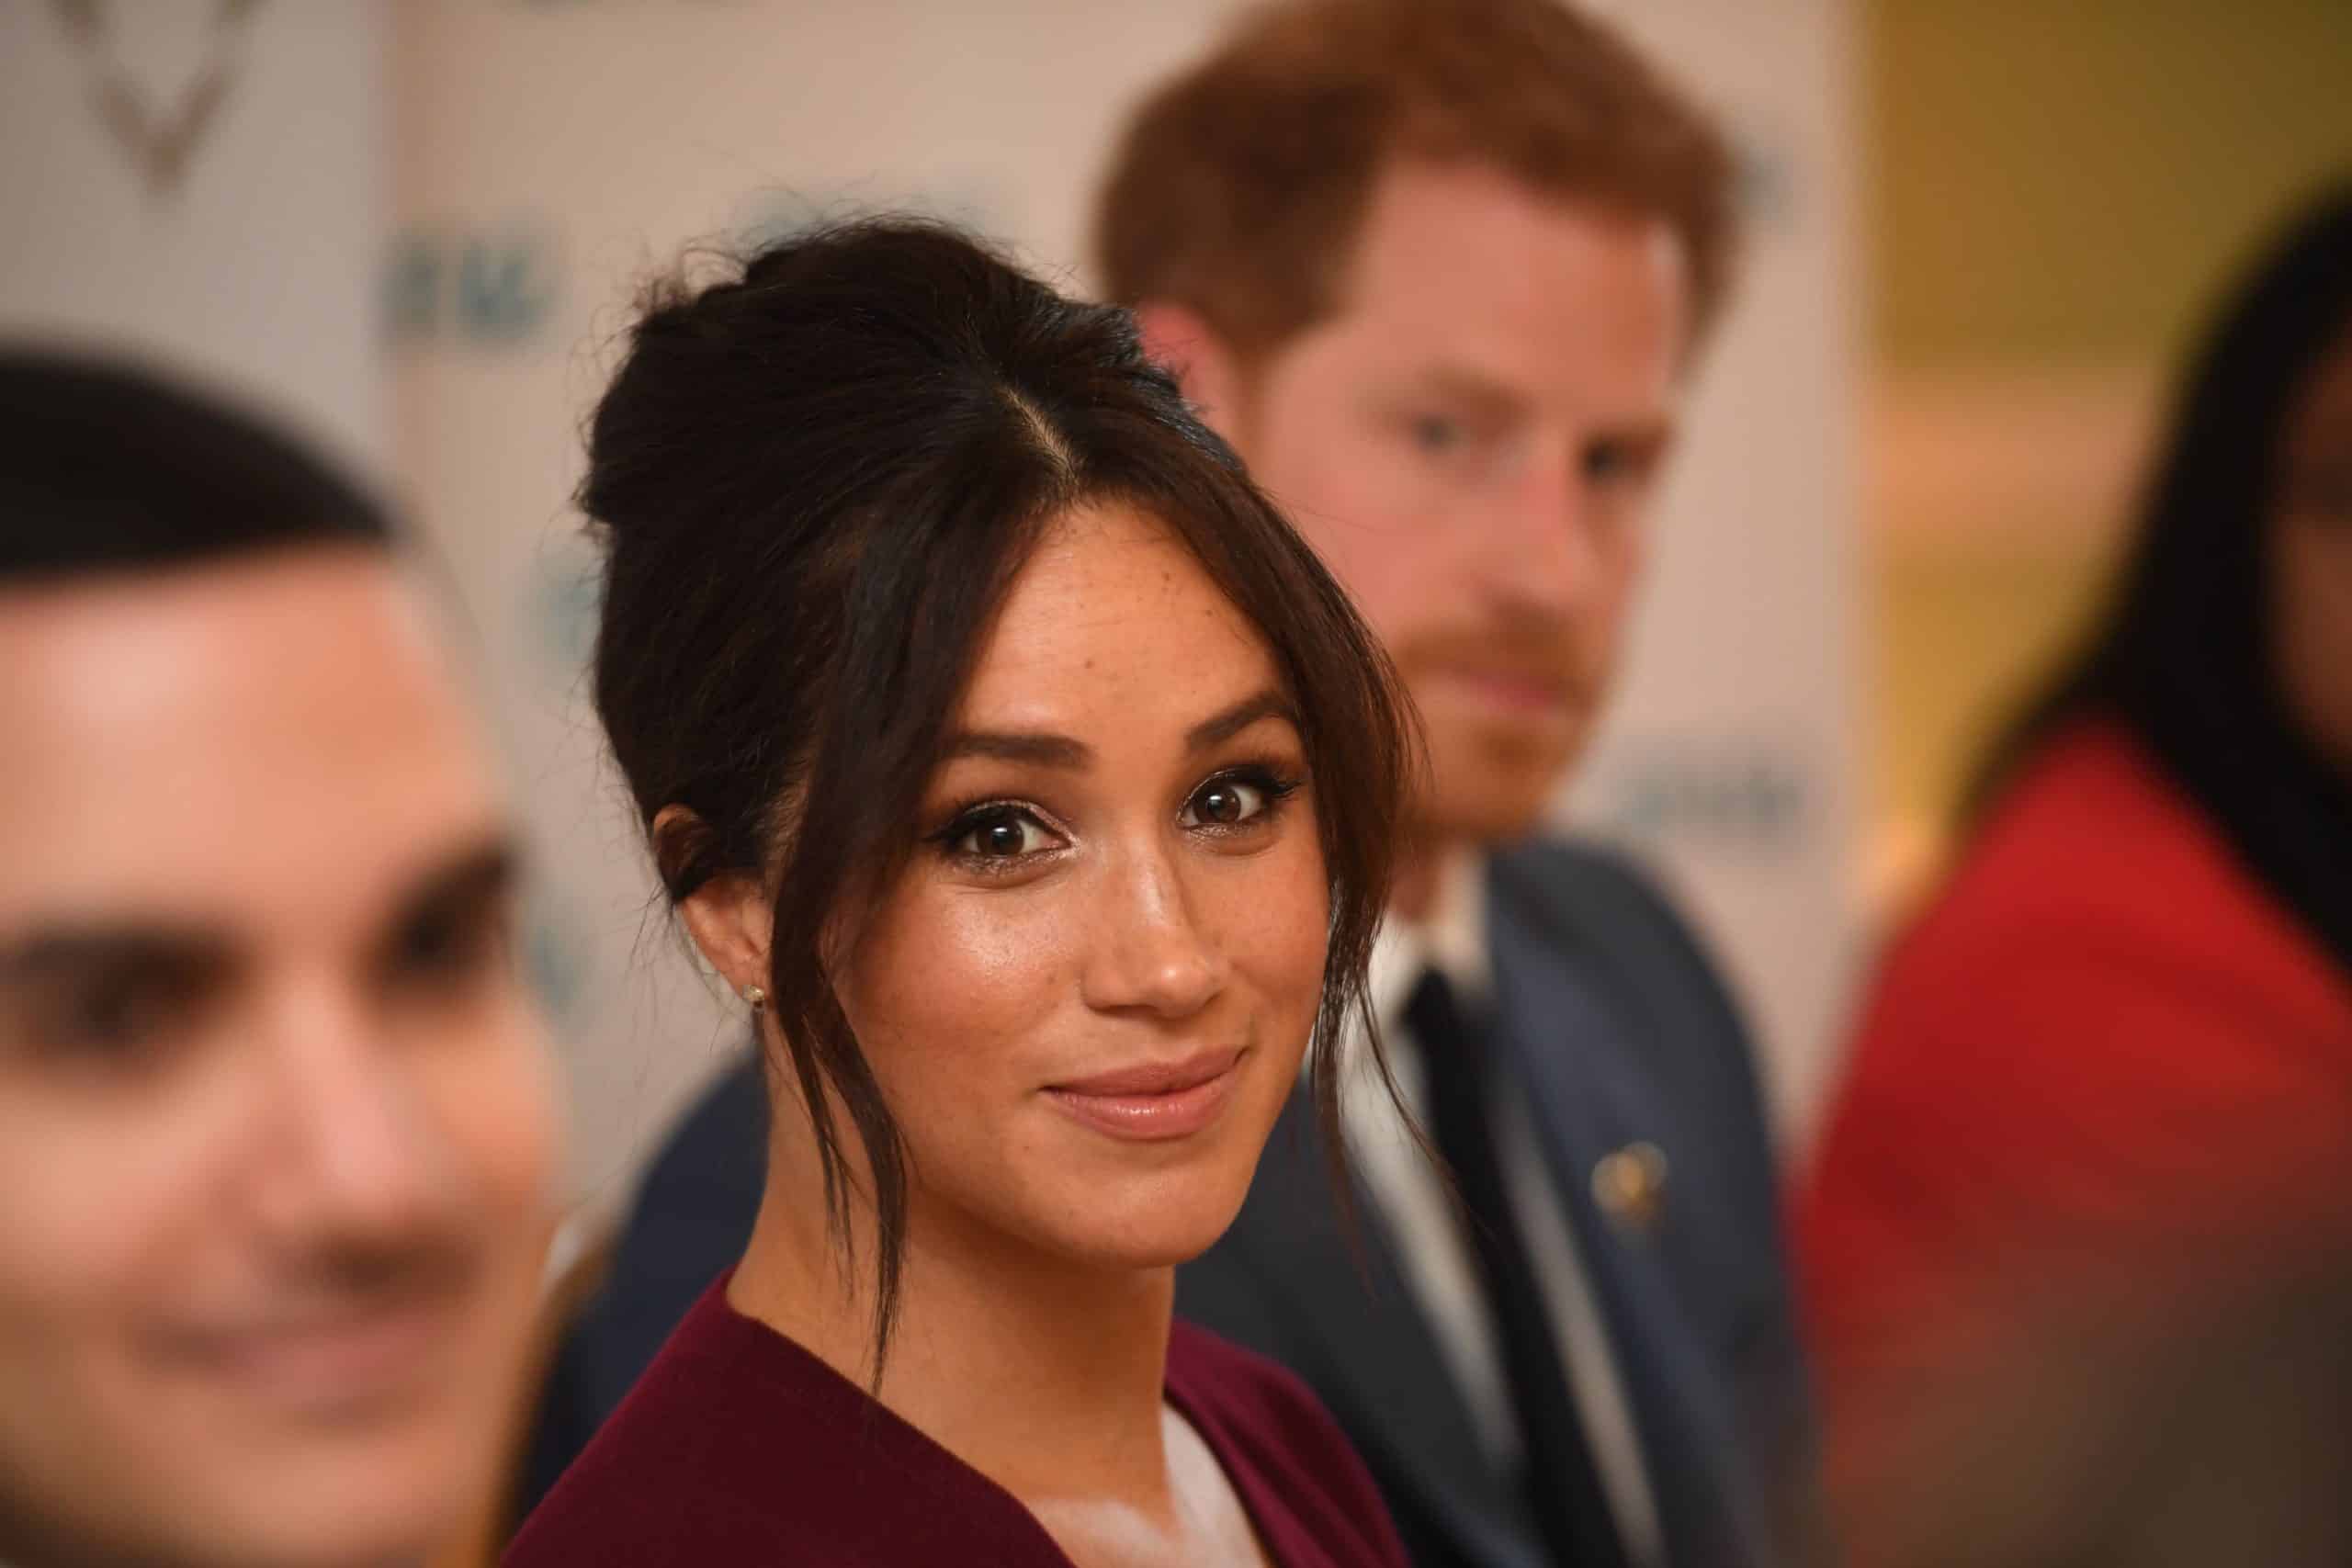 Mail on Sunday publisher loses appeal against Meghan Markle